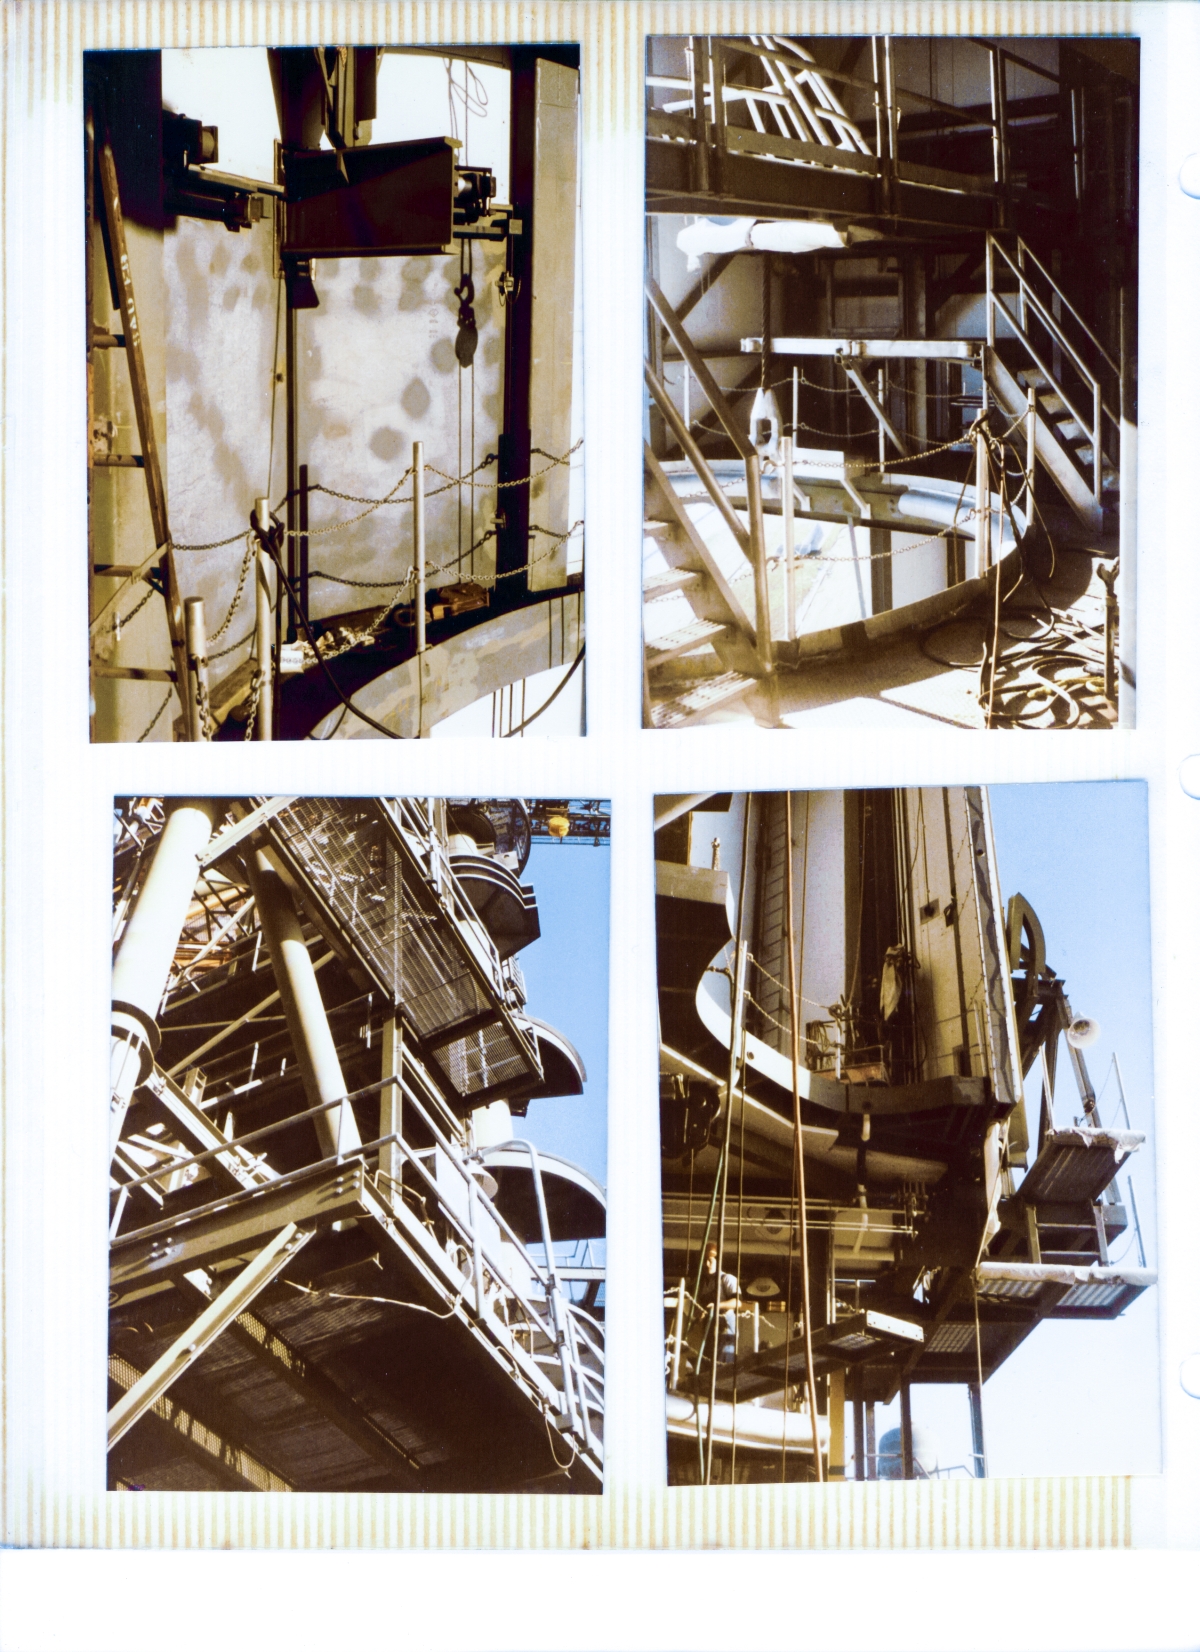 Differing views of the Rotating Service Structure at Launch Complex 39-B, Kennedy Space Center, Florida, including (clockwise from top left) the Monorail Transfer Doors, platform cutouts inside the RCS Room for the nose of the Space Shuttle, platform cutouts for the OMS Pod area of the Space Shuttle at elevations 135' and 125', and the array of framing steel and platforms in the area between Column Lines 1 (the Hinge Column) and 2 on the RSS.